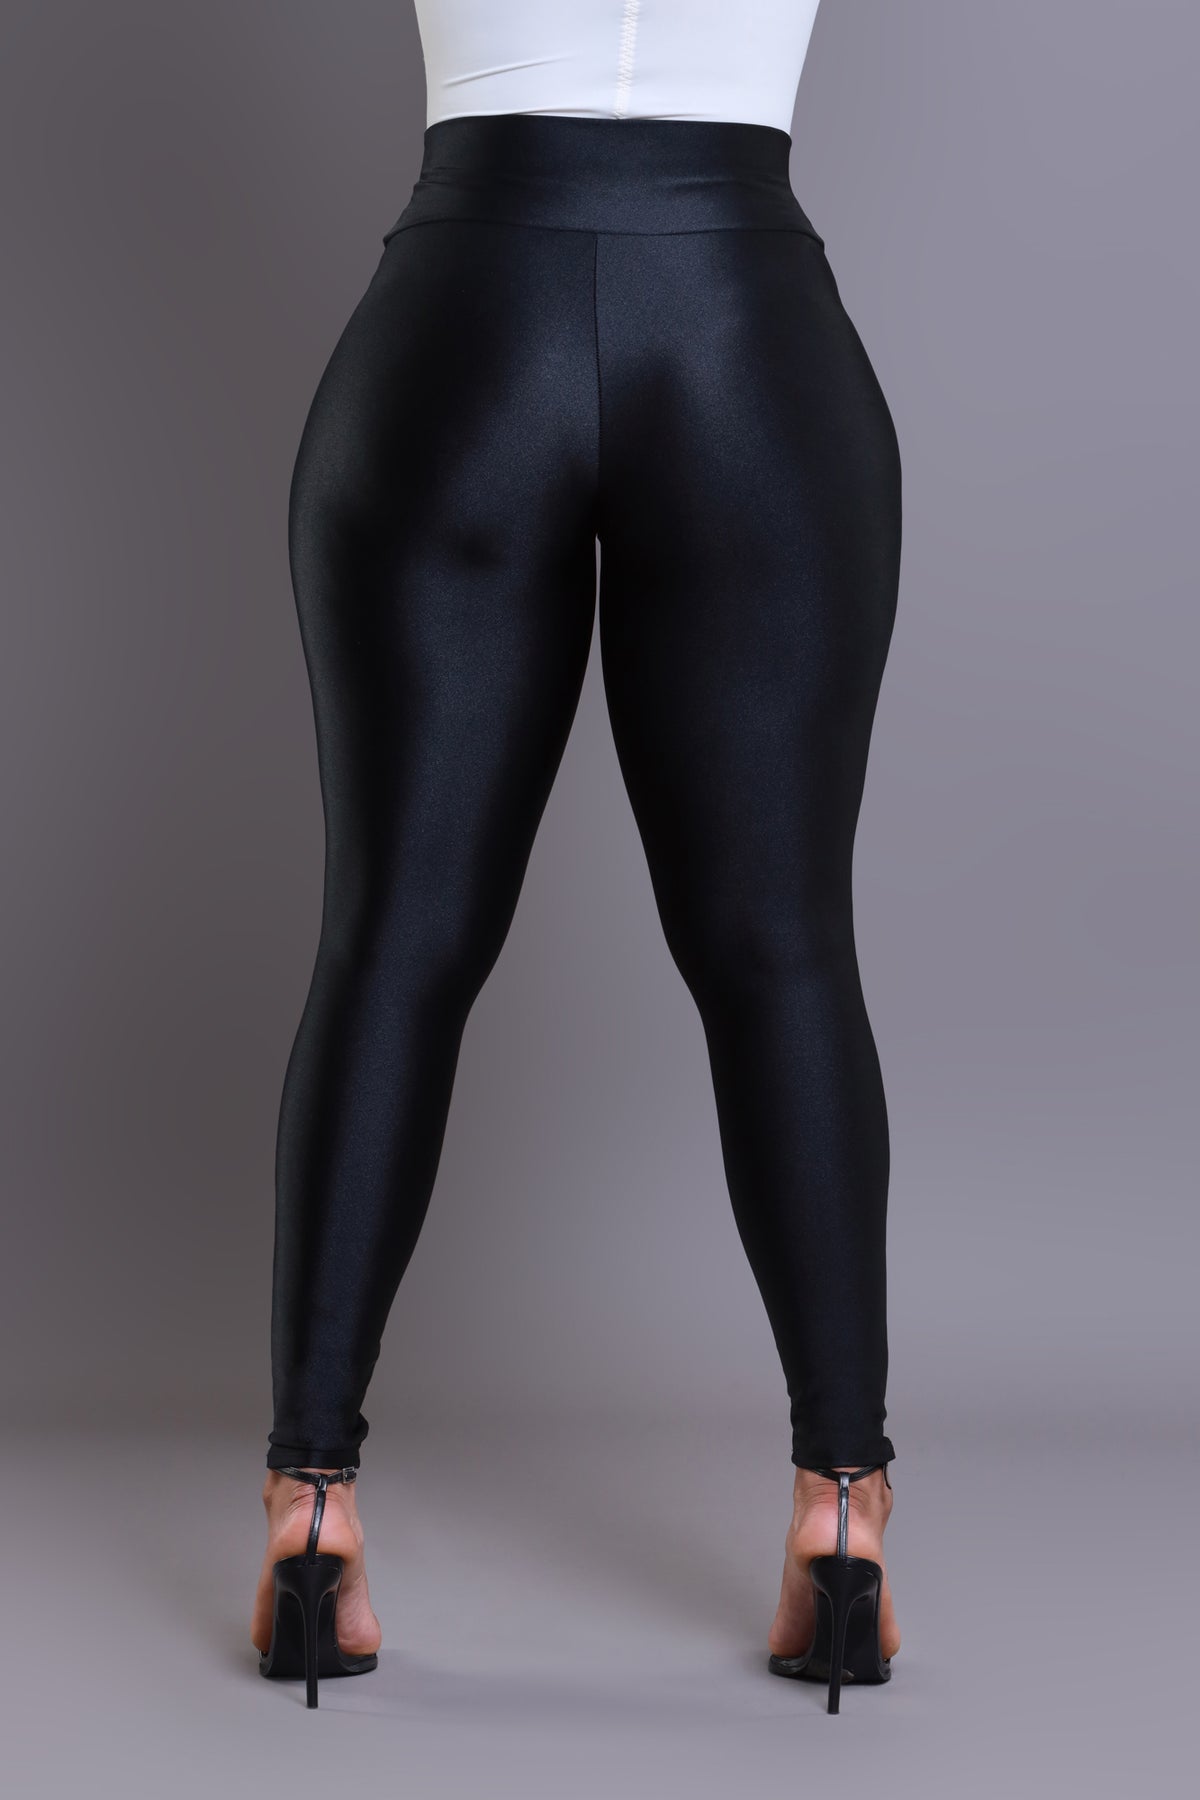 Snatch me up-shiny black leggings - Luxe Clothing Boutique & Accessories